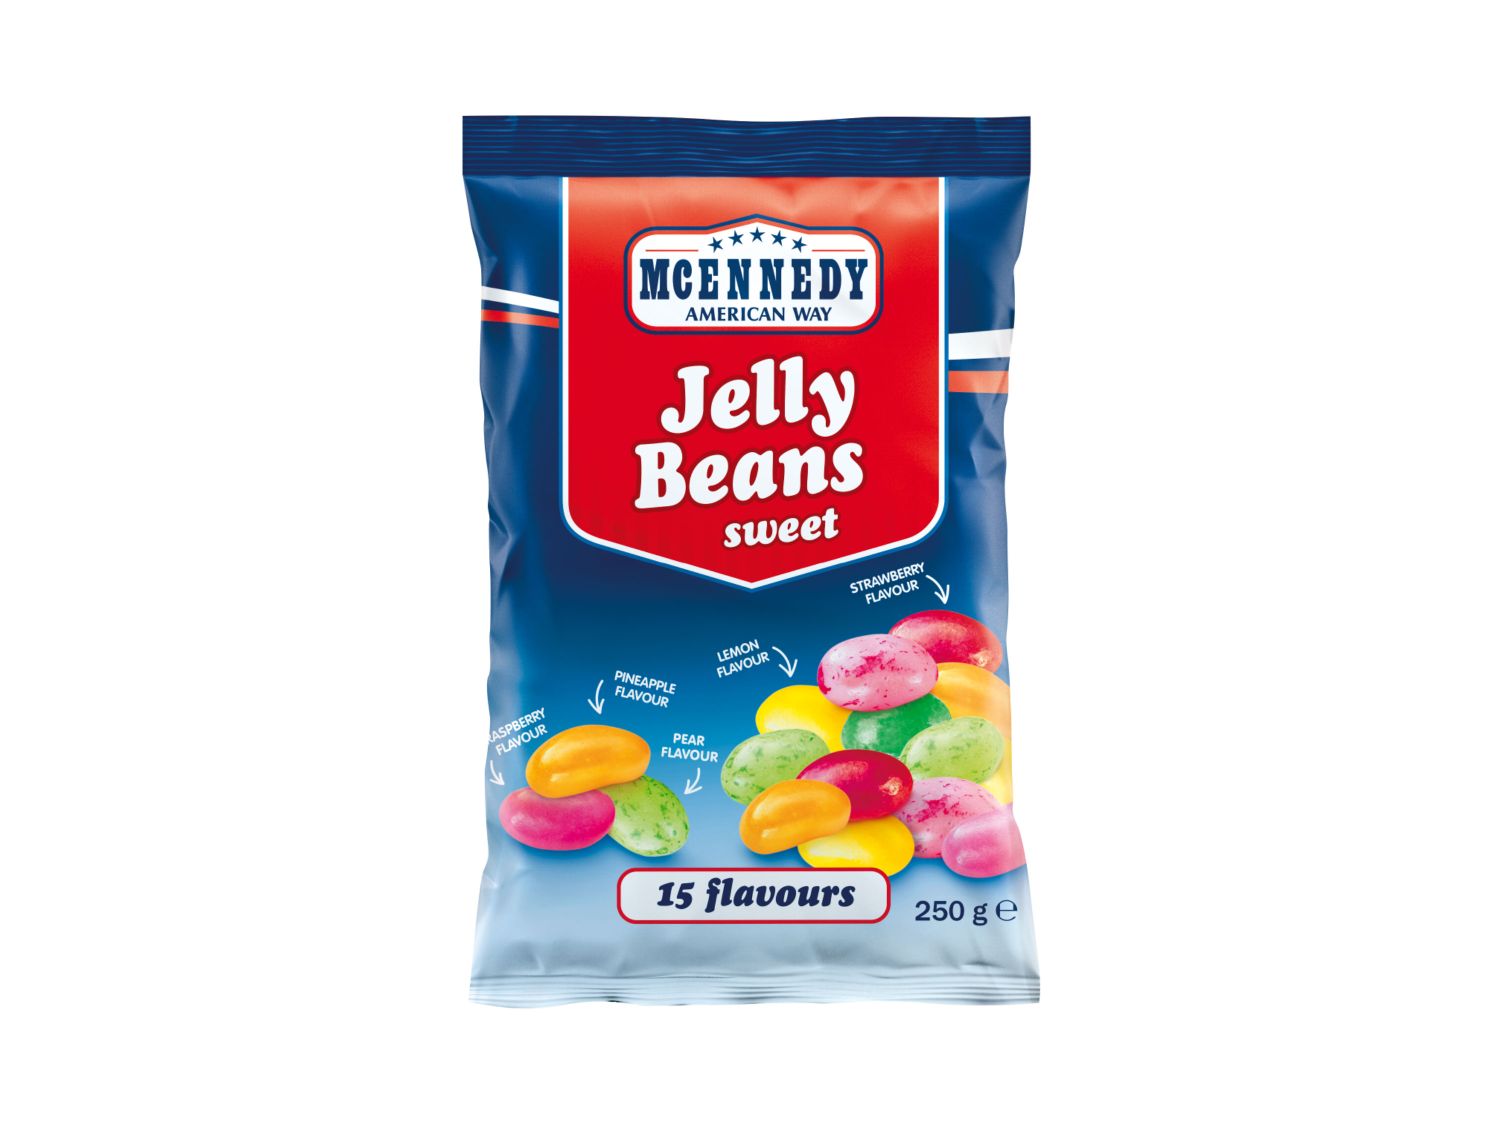 McEnnedy® Jelly Beans Portugal at - Lidl